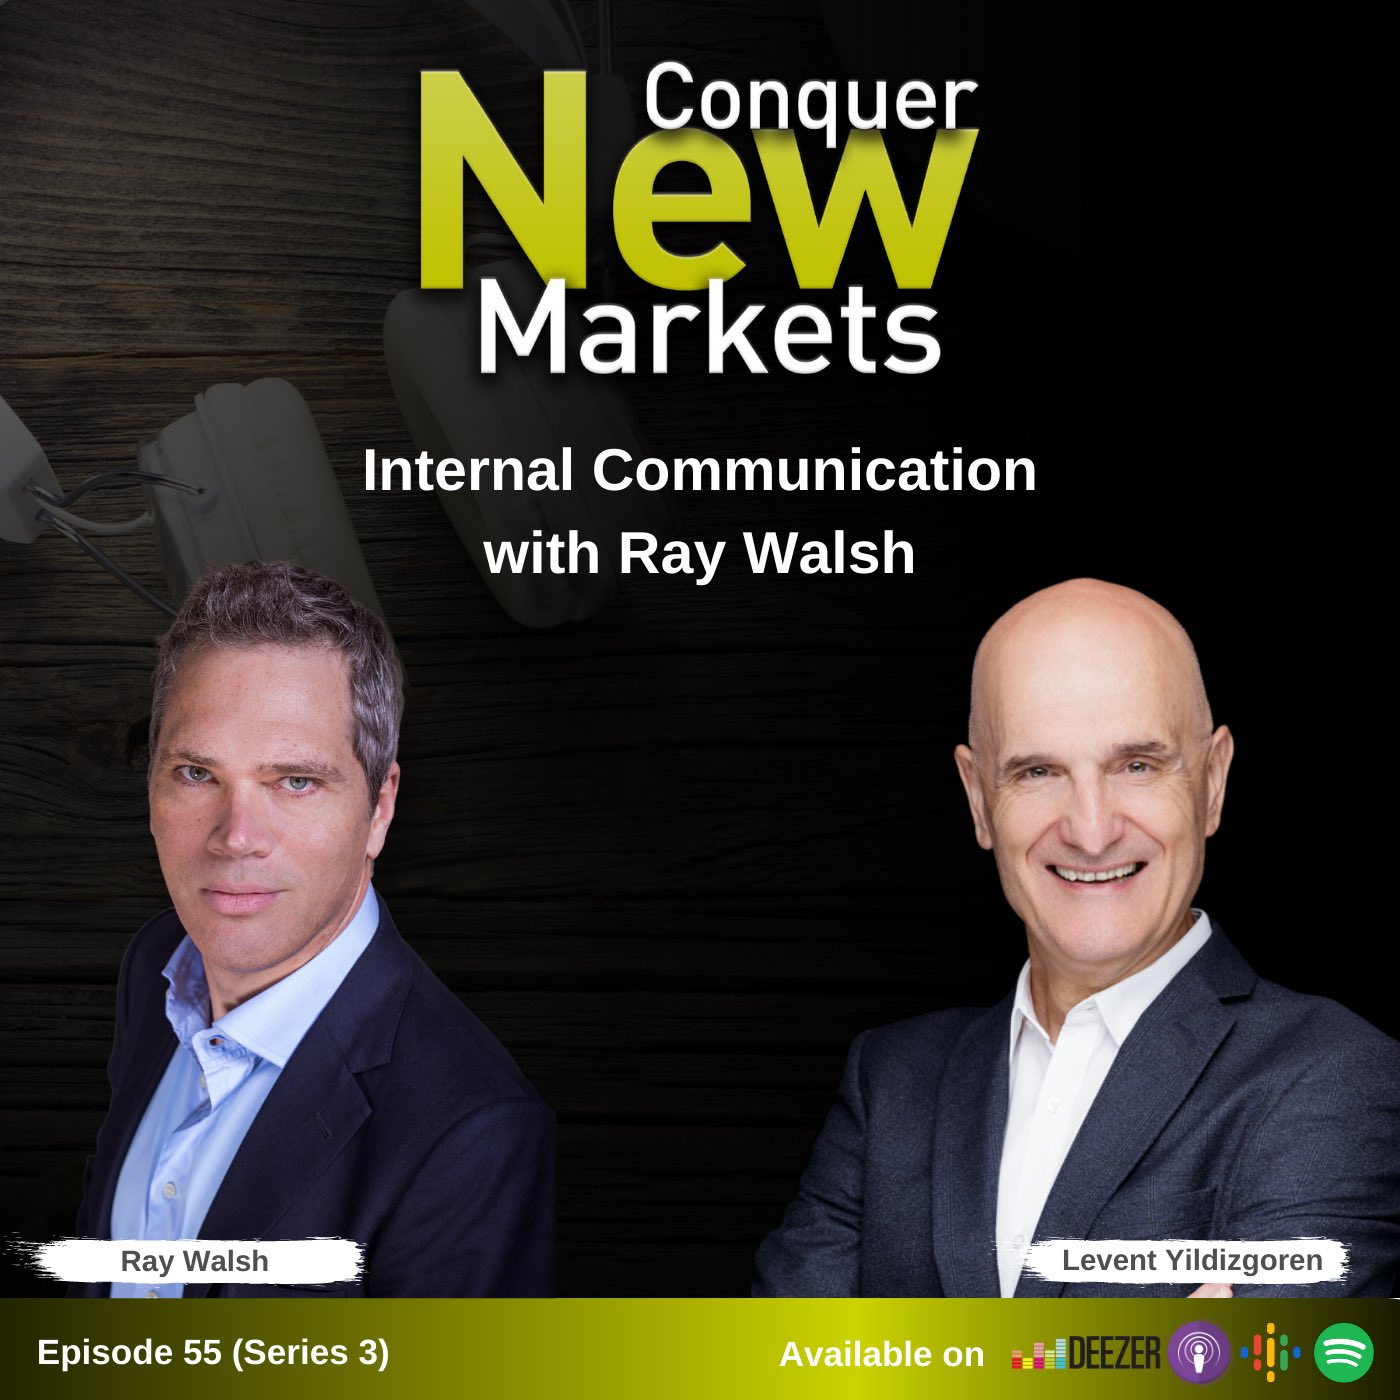 Conquer New Markets podcast